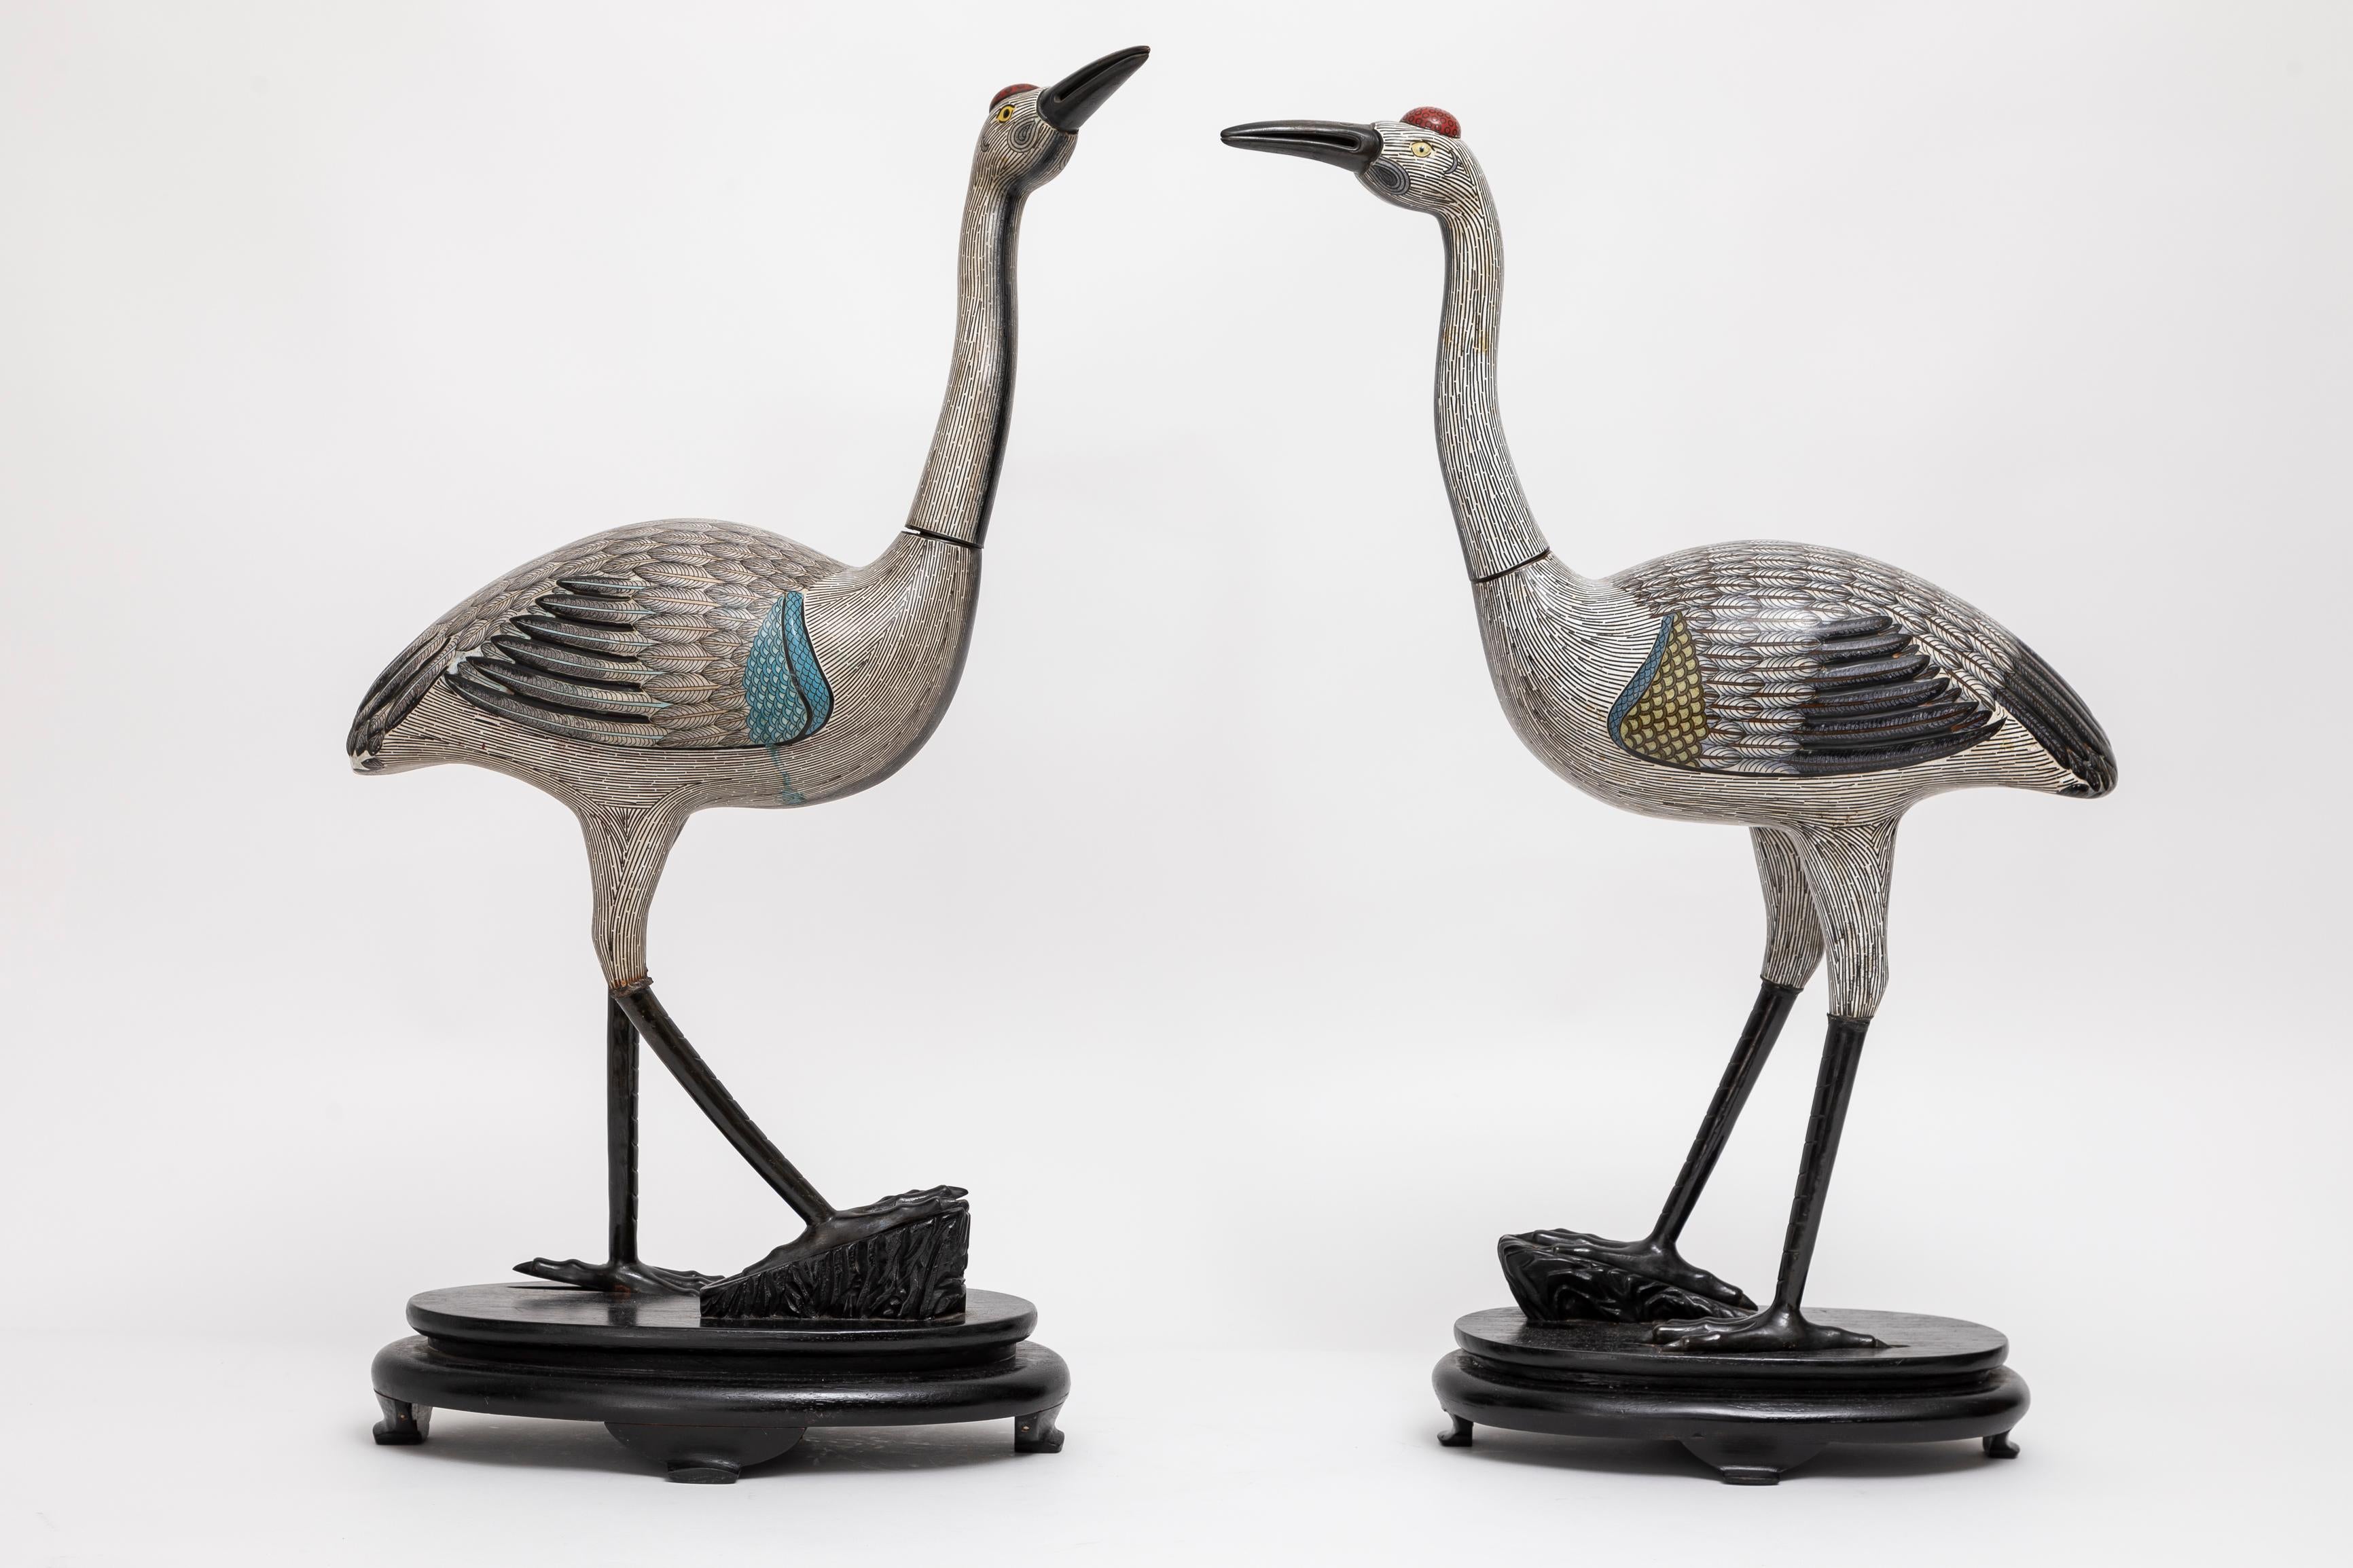 20th Century A Marvelous Pair of Chinese Cloisonné Figures of Cranes on Stands, Qing Dynasty